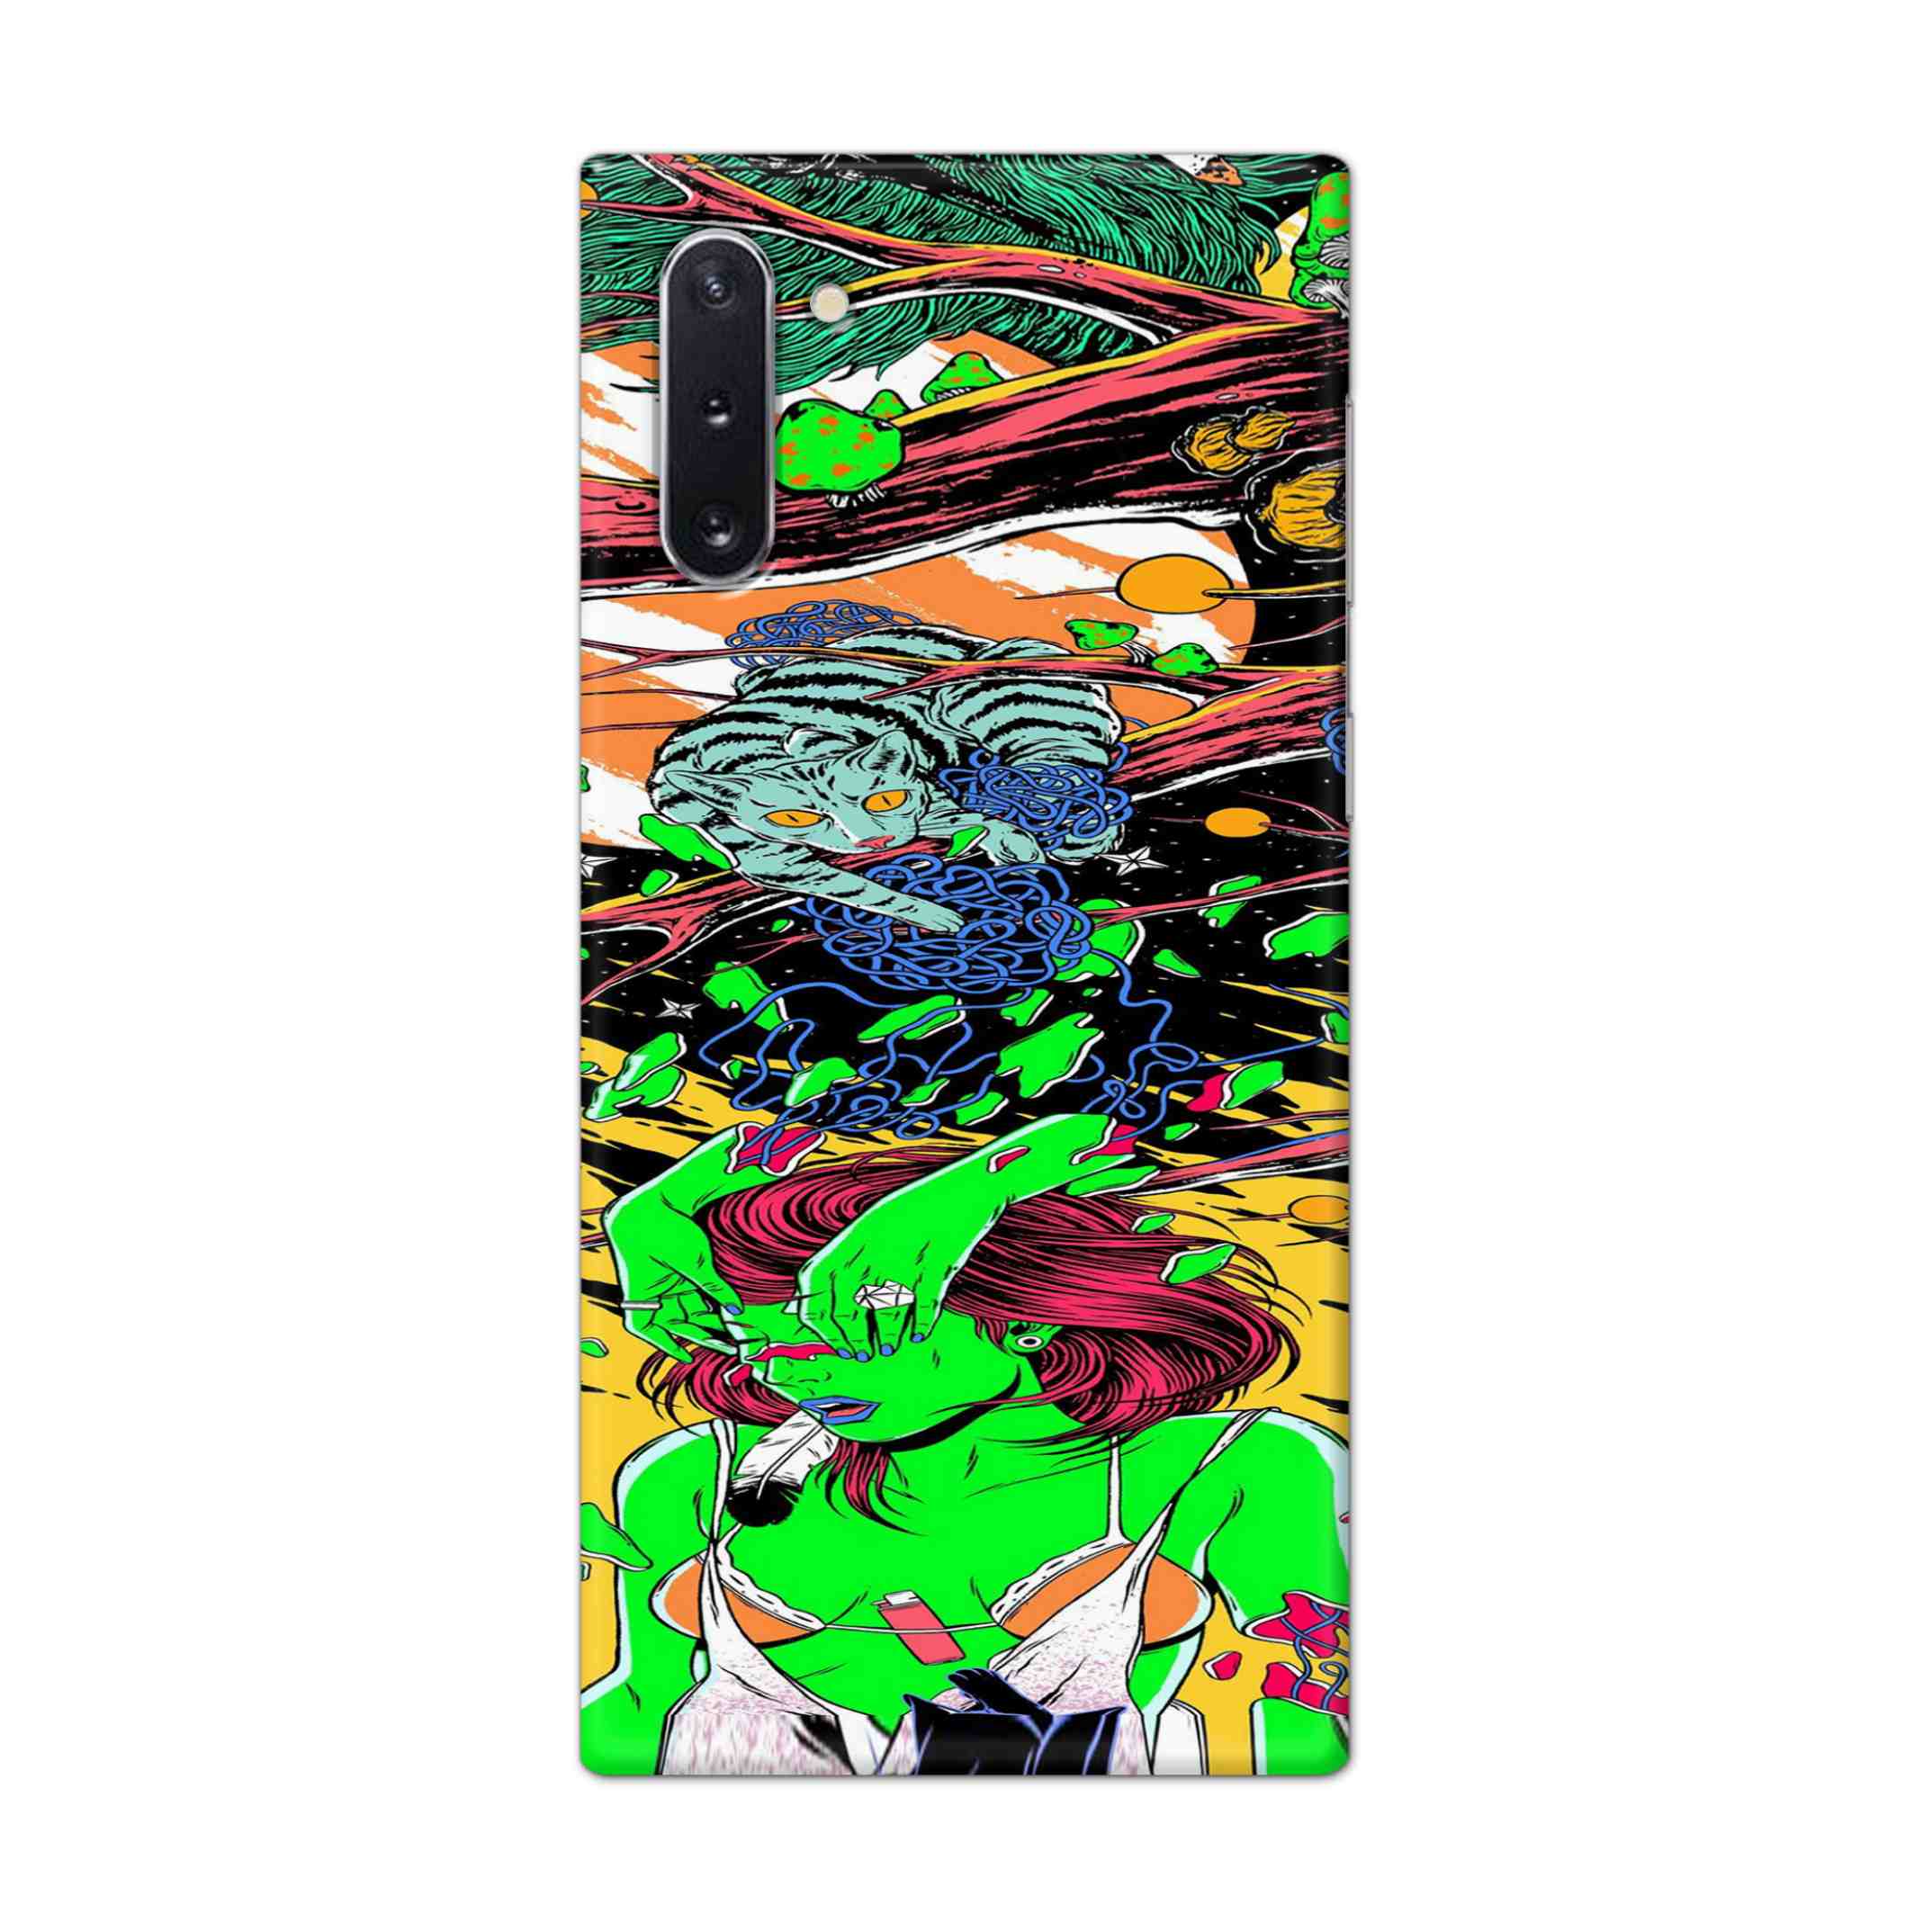 Buy Green Girl Art Hard Back Mobile Phone Case Cover For Samsung Galaxy Note 10 Online